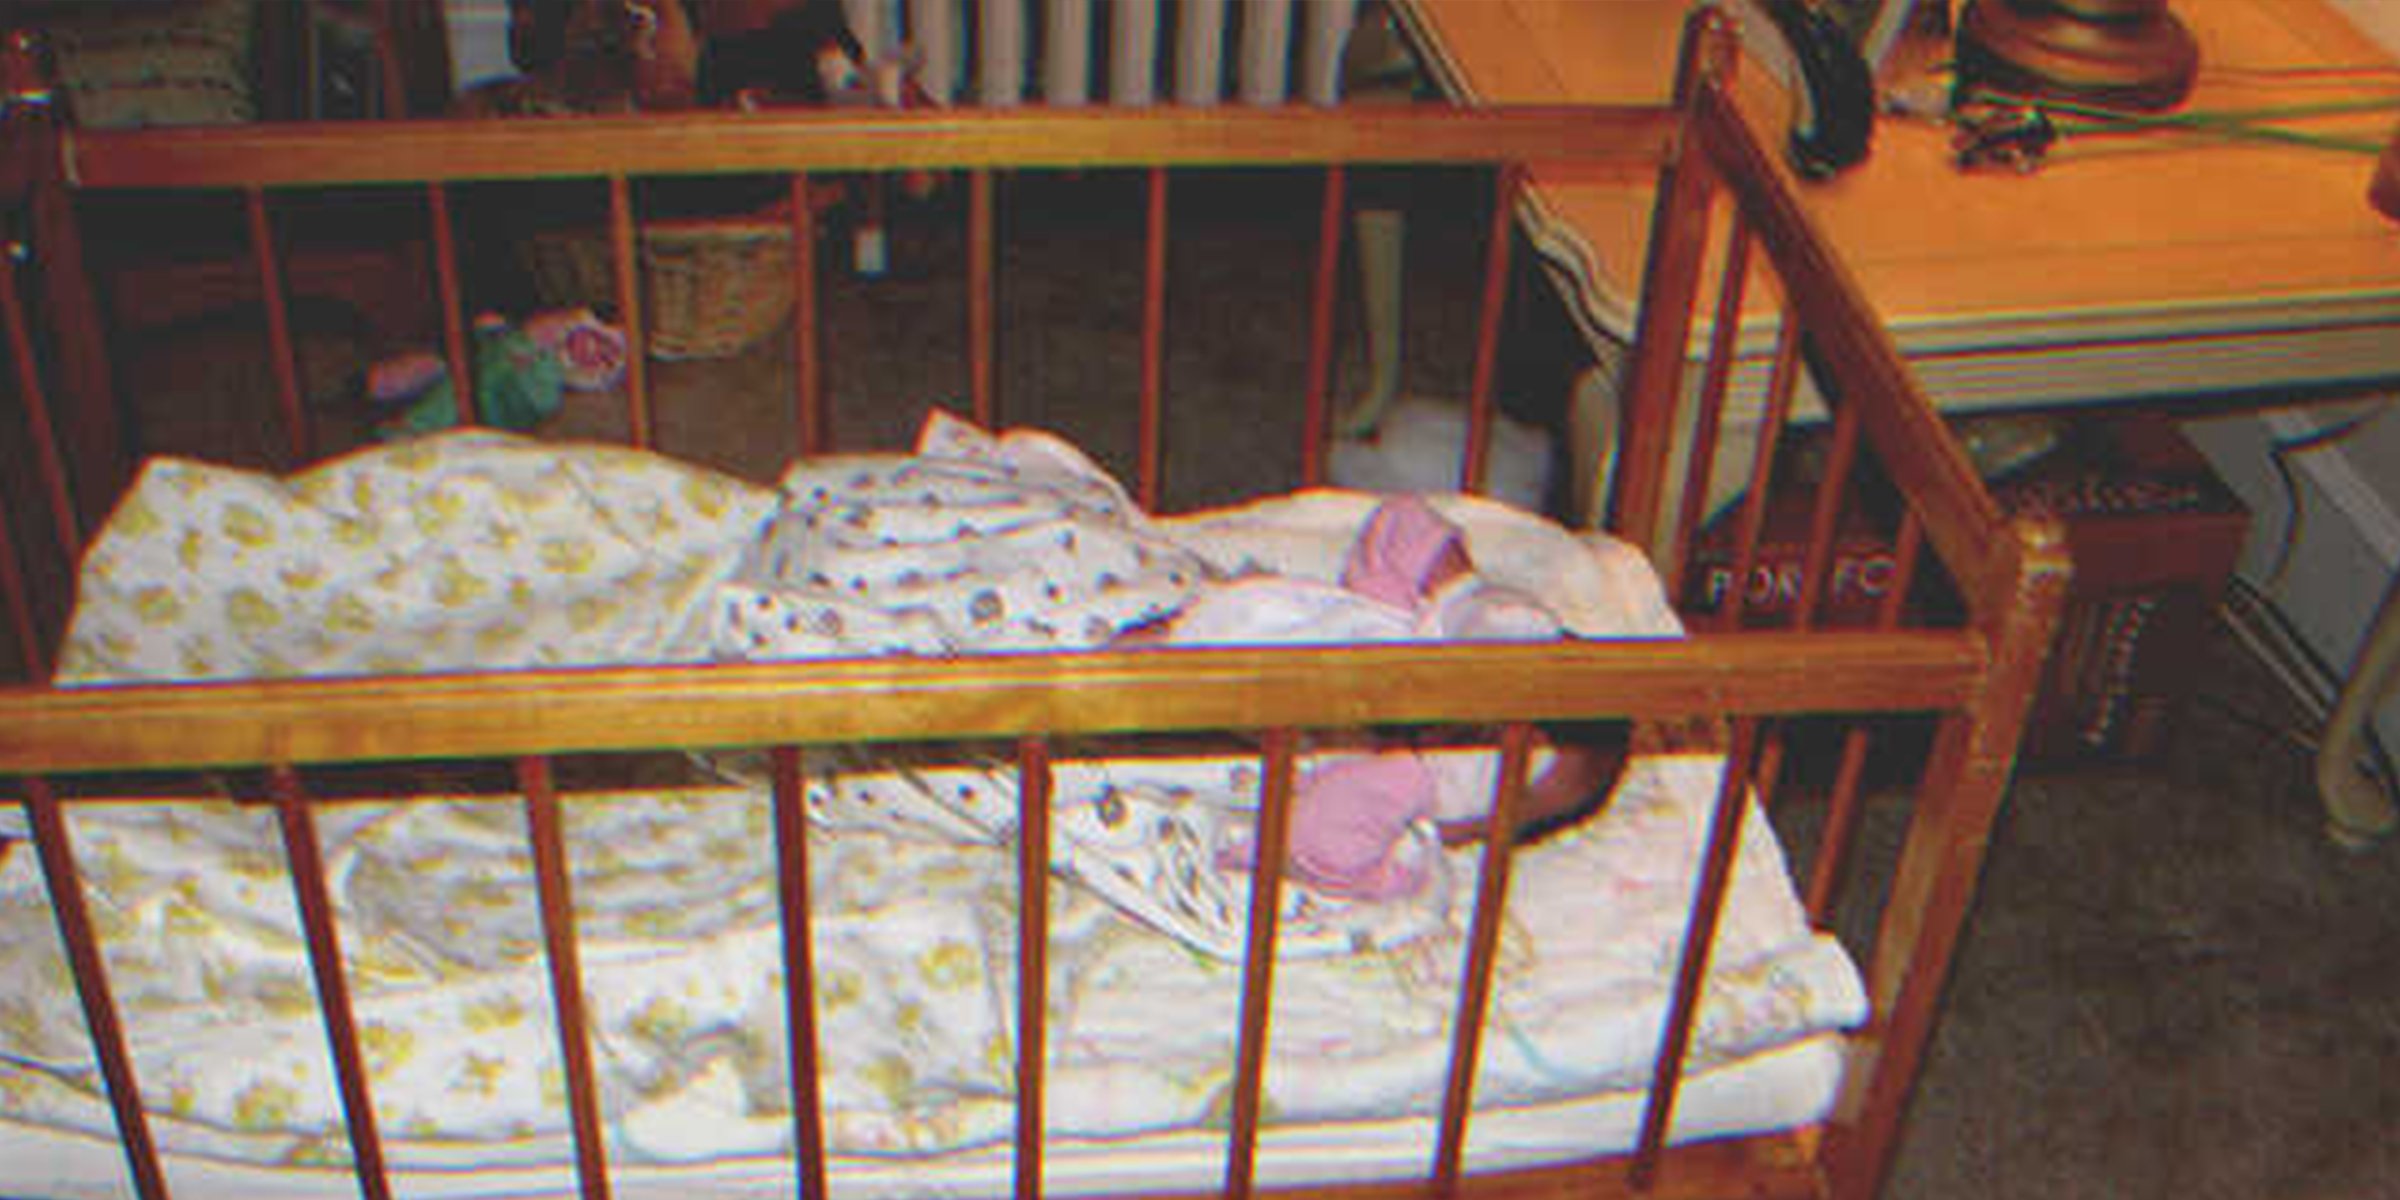 A baby in an old crib | Source: Flickr/Julie Girard